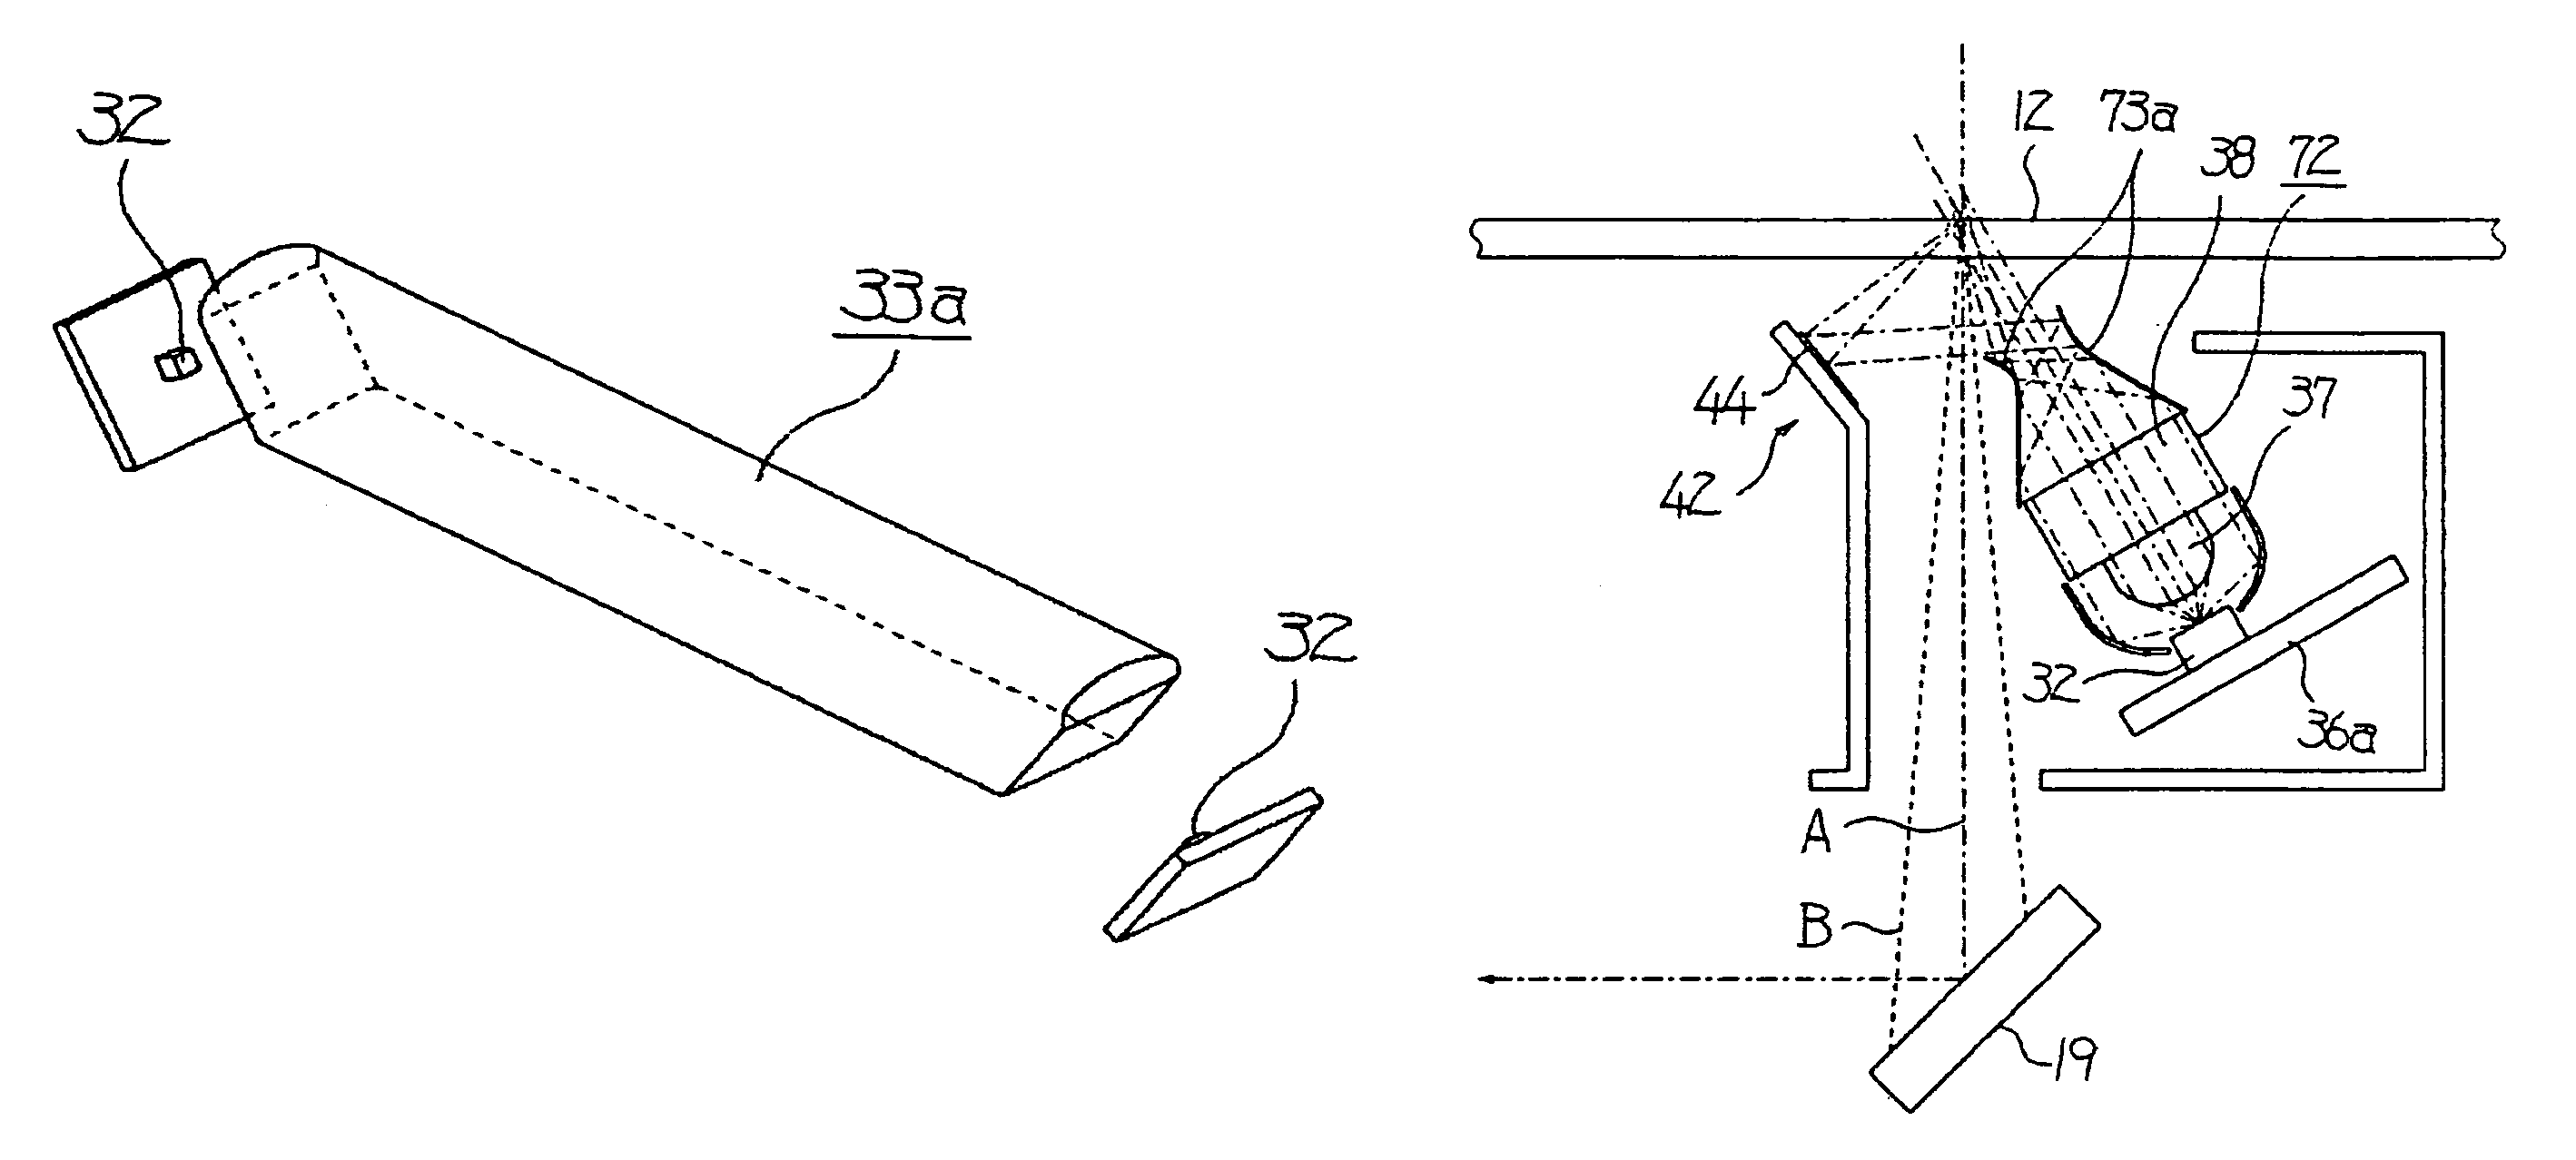 Lighting device image, reading apparatus, and image forming apparatus